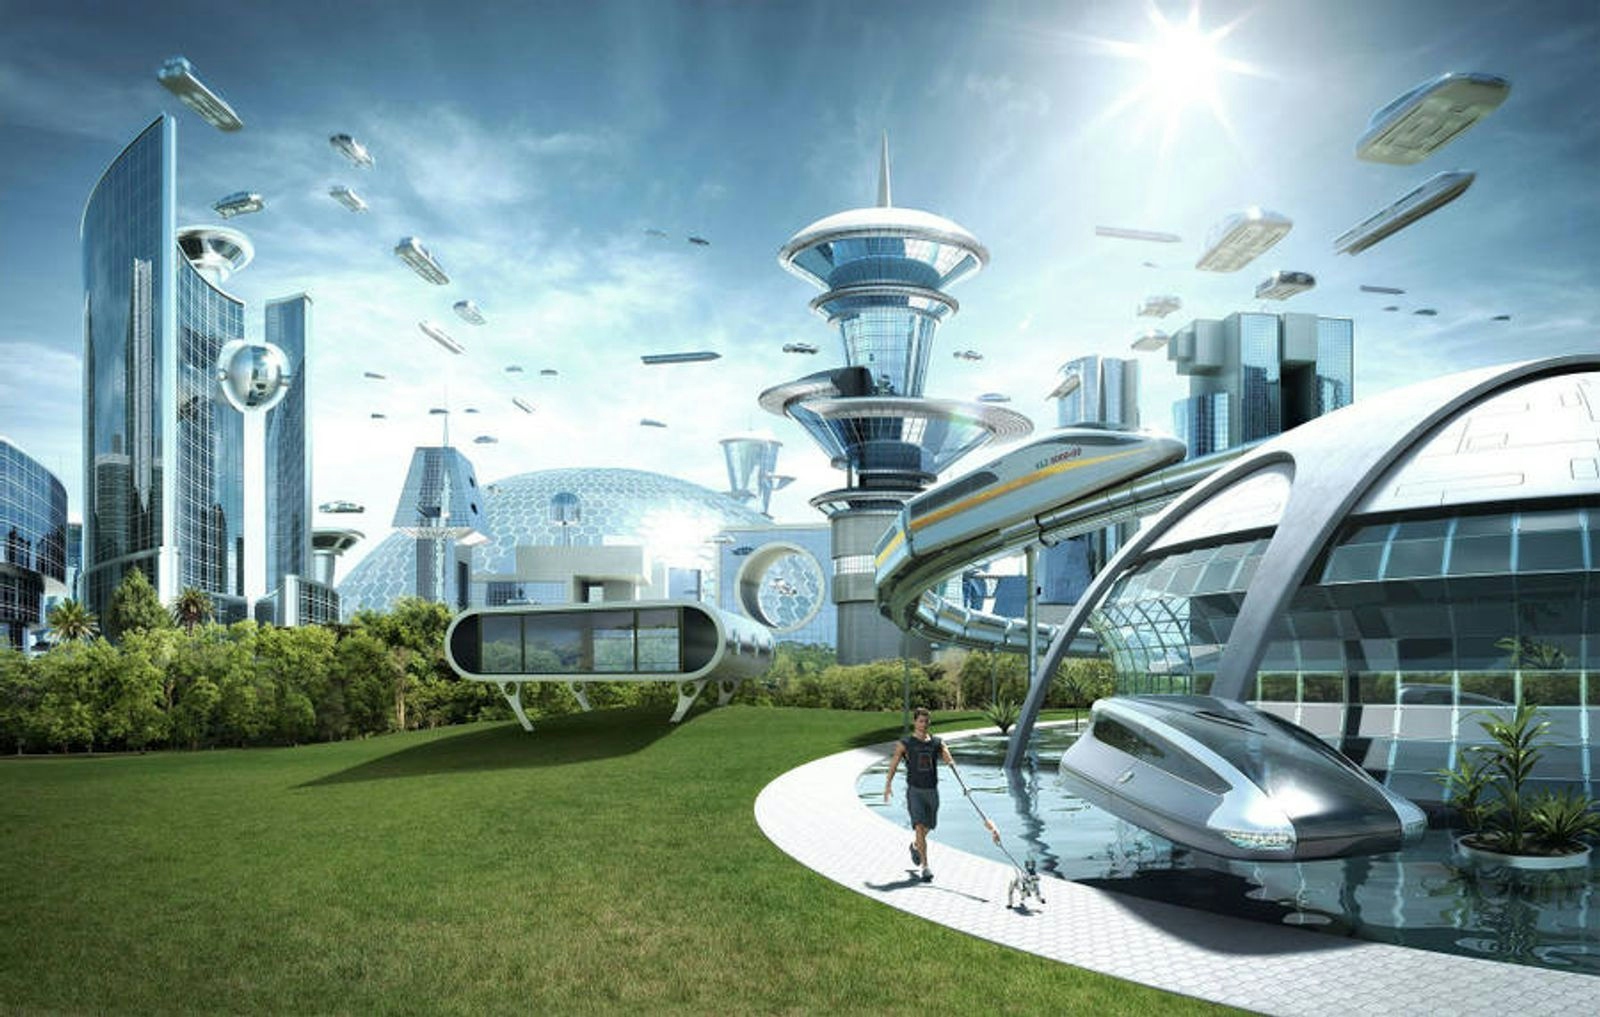 Society if people stopped tipping their hats at cars